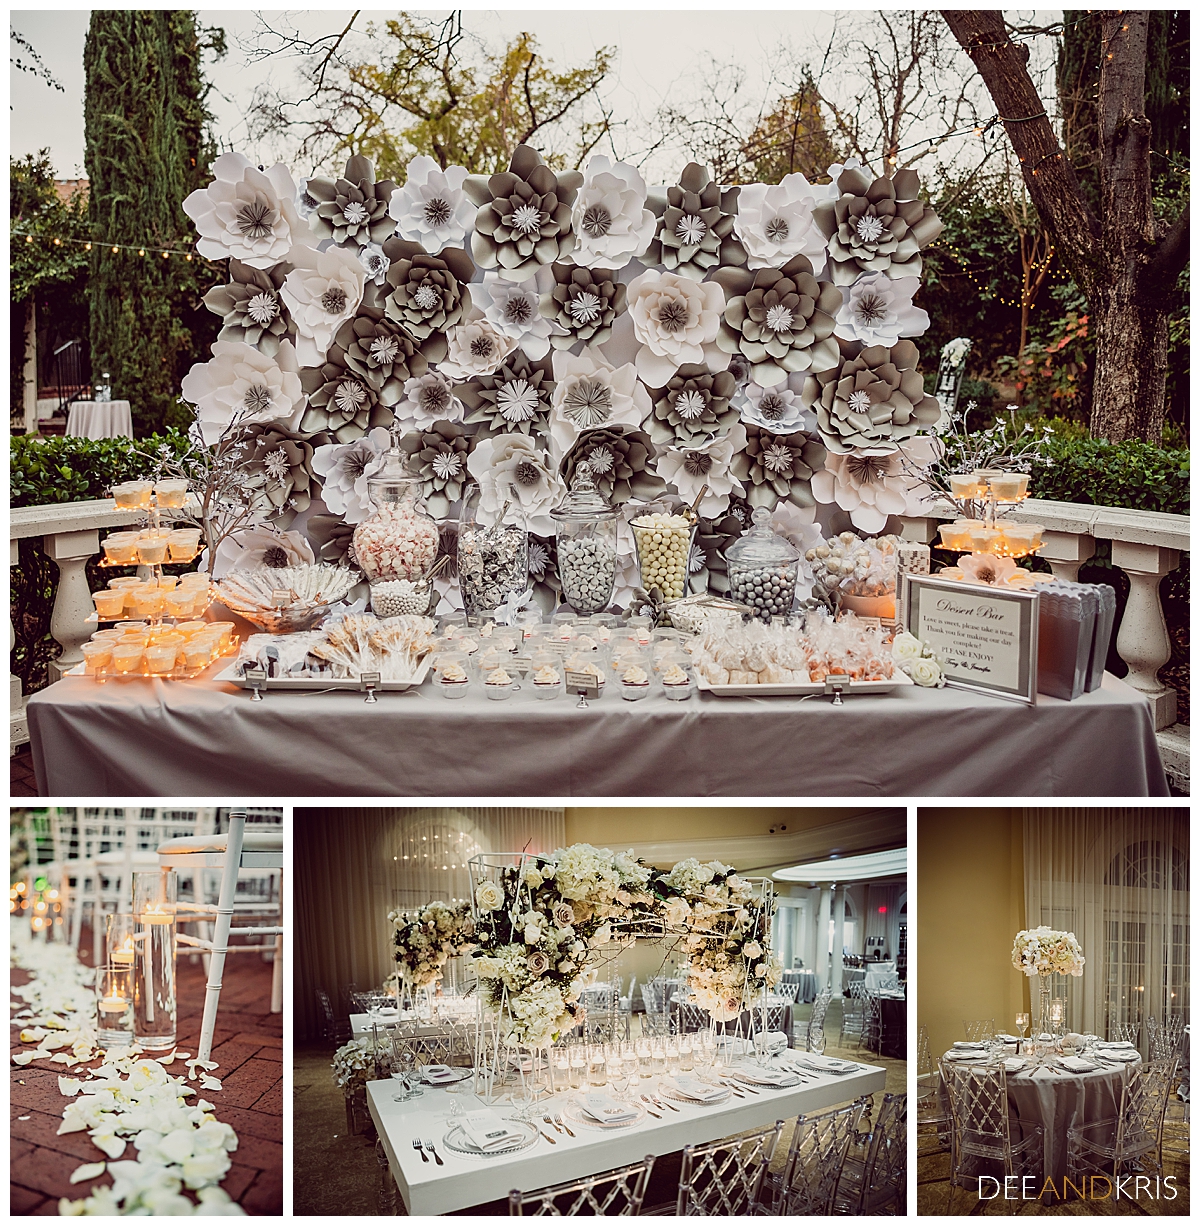 Four images: top image of sweets table in front of wall of flowers. Bottom left image of flower petals and glass candle vases lining aisle. Bottom center image of table setting and floral centerpiece. Bottom right image of round table setting and tall centerpiece.